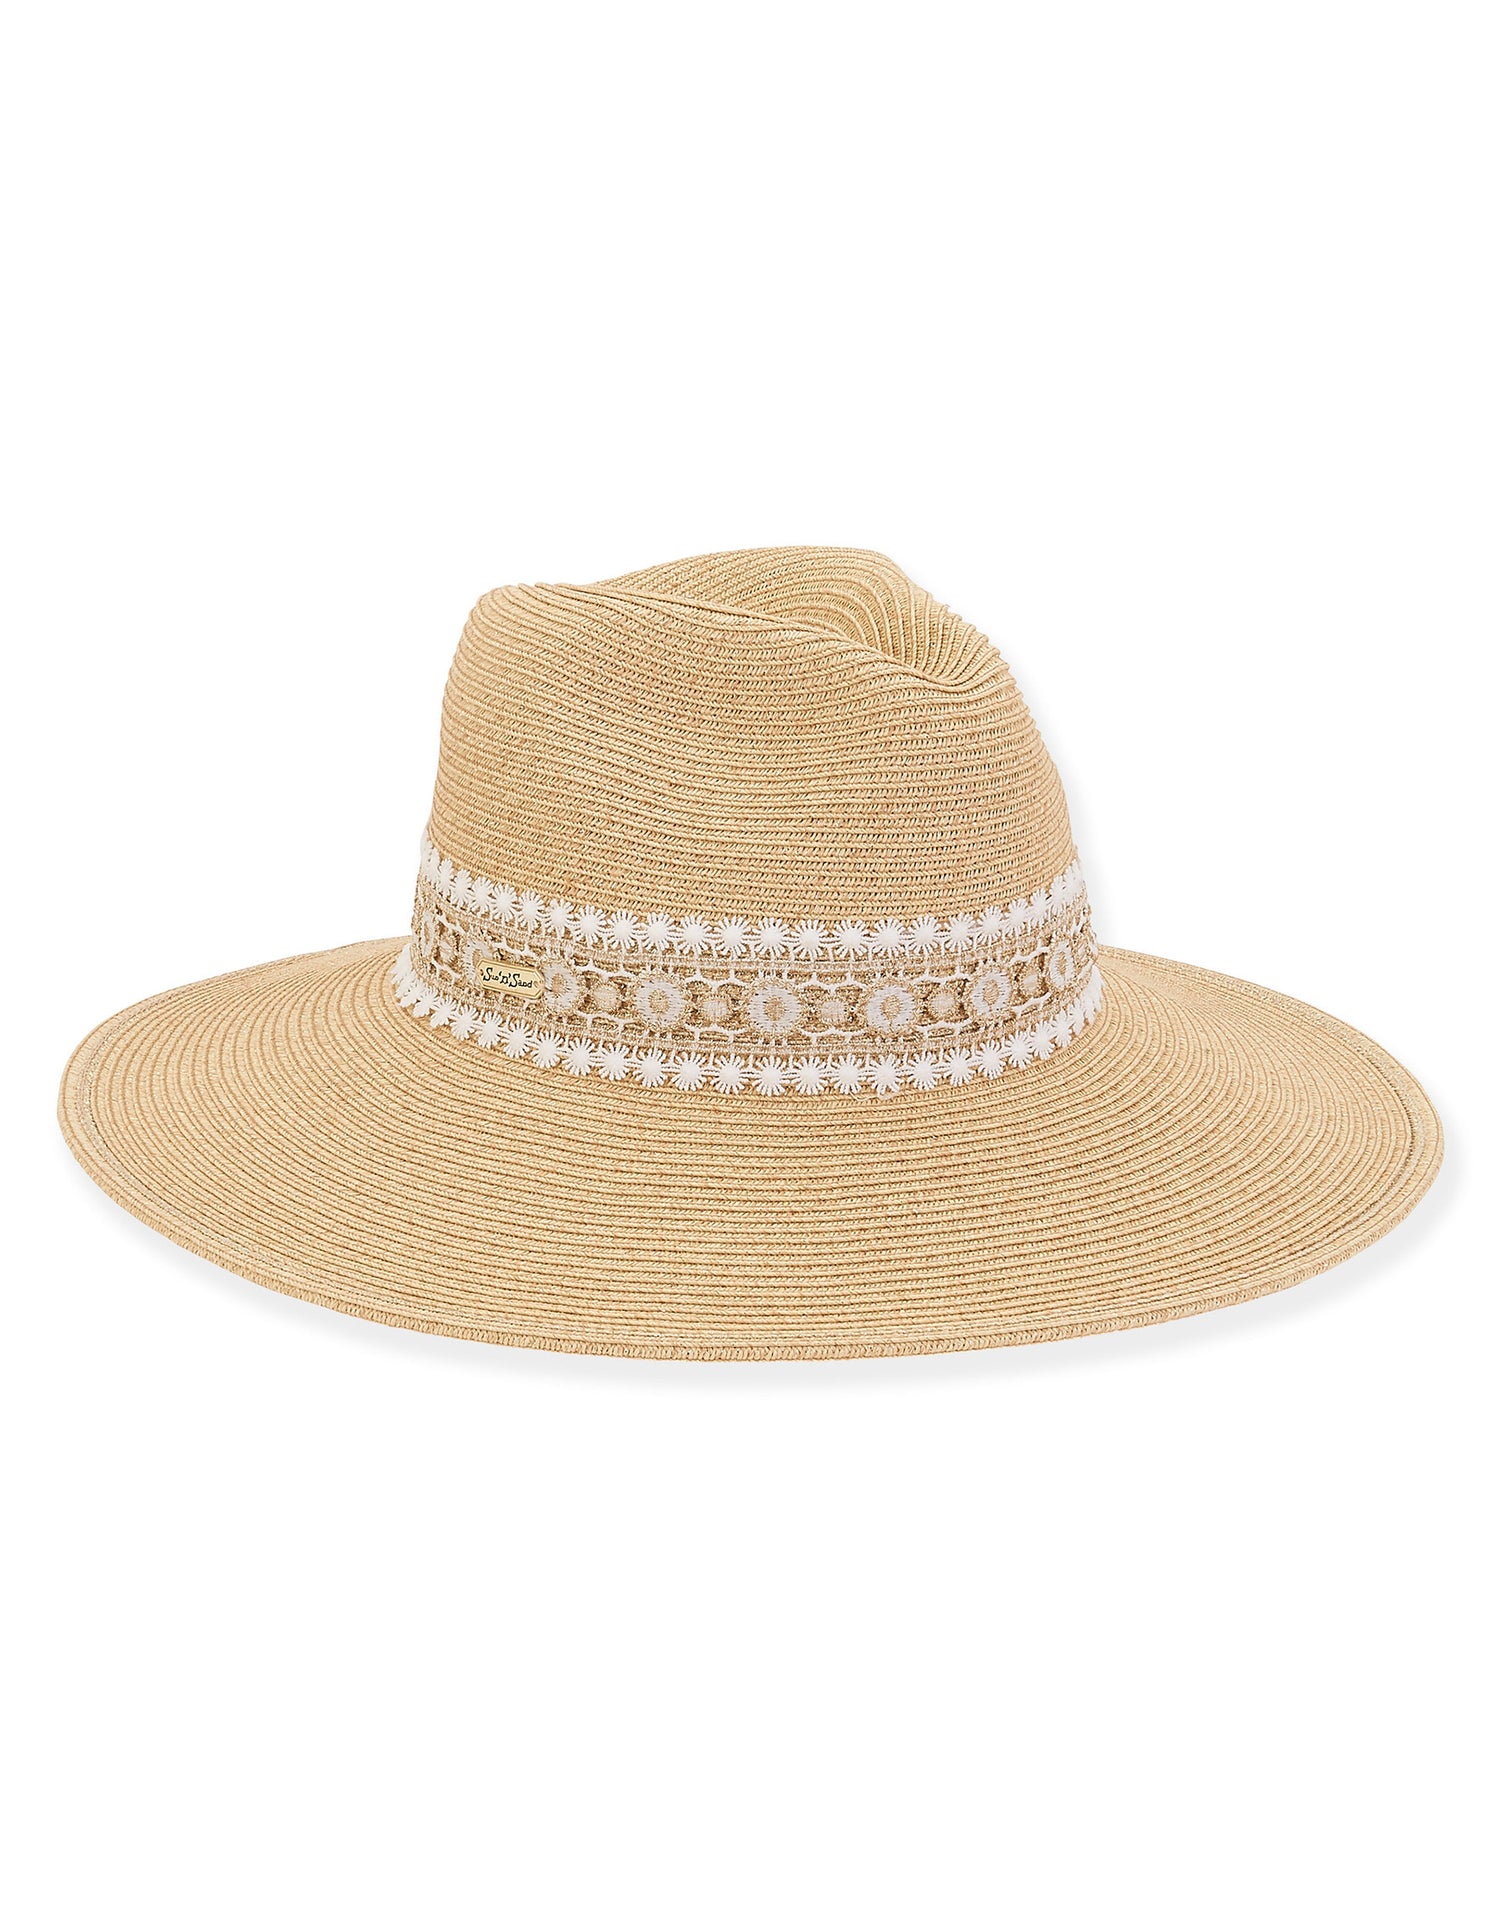 Paper Braid Safari Hat by Sun N Sand in Natural - Angled View